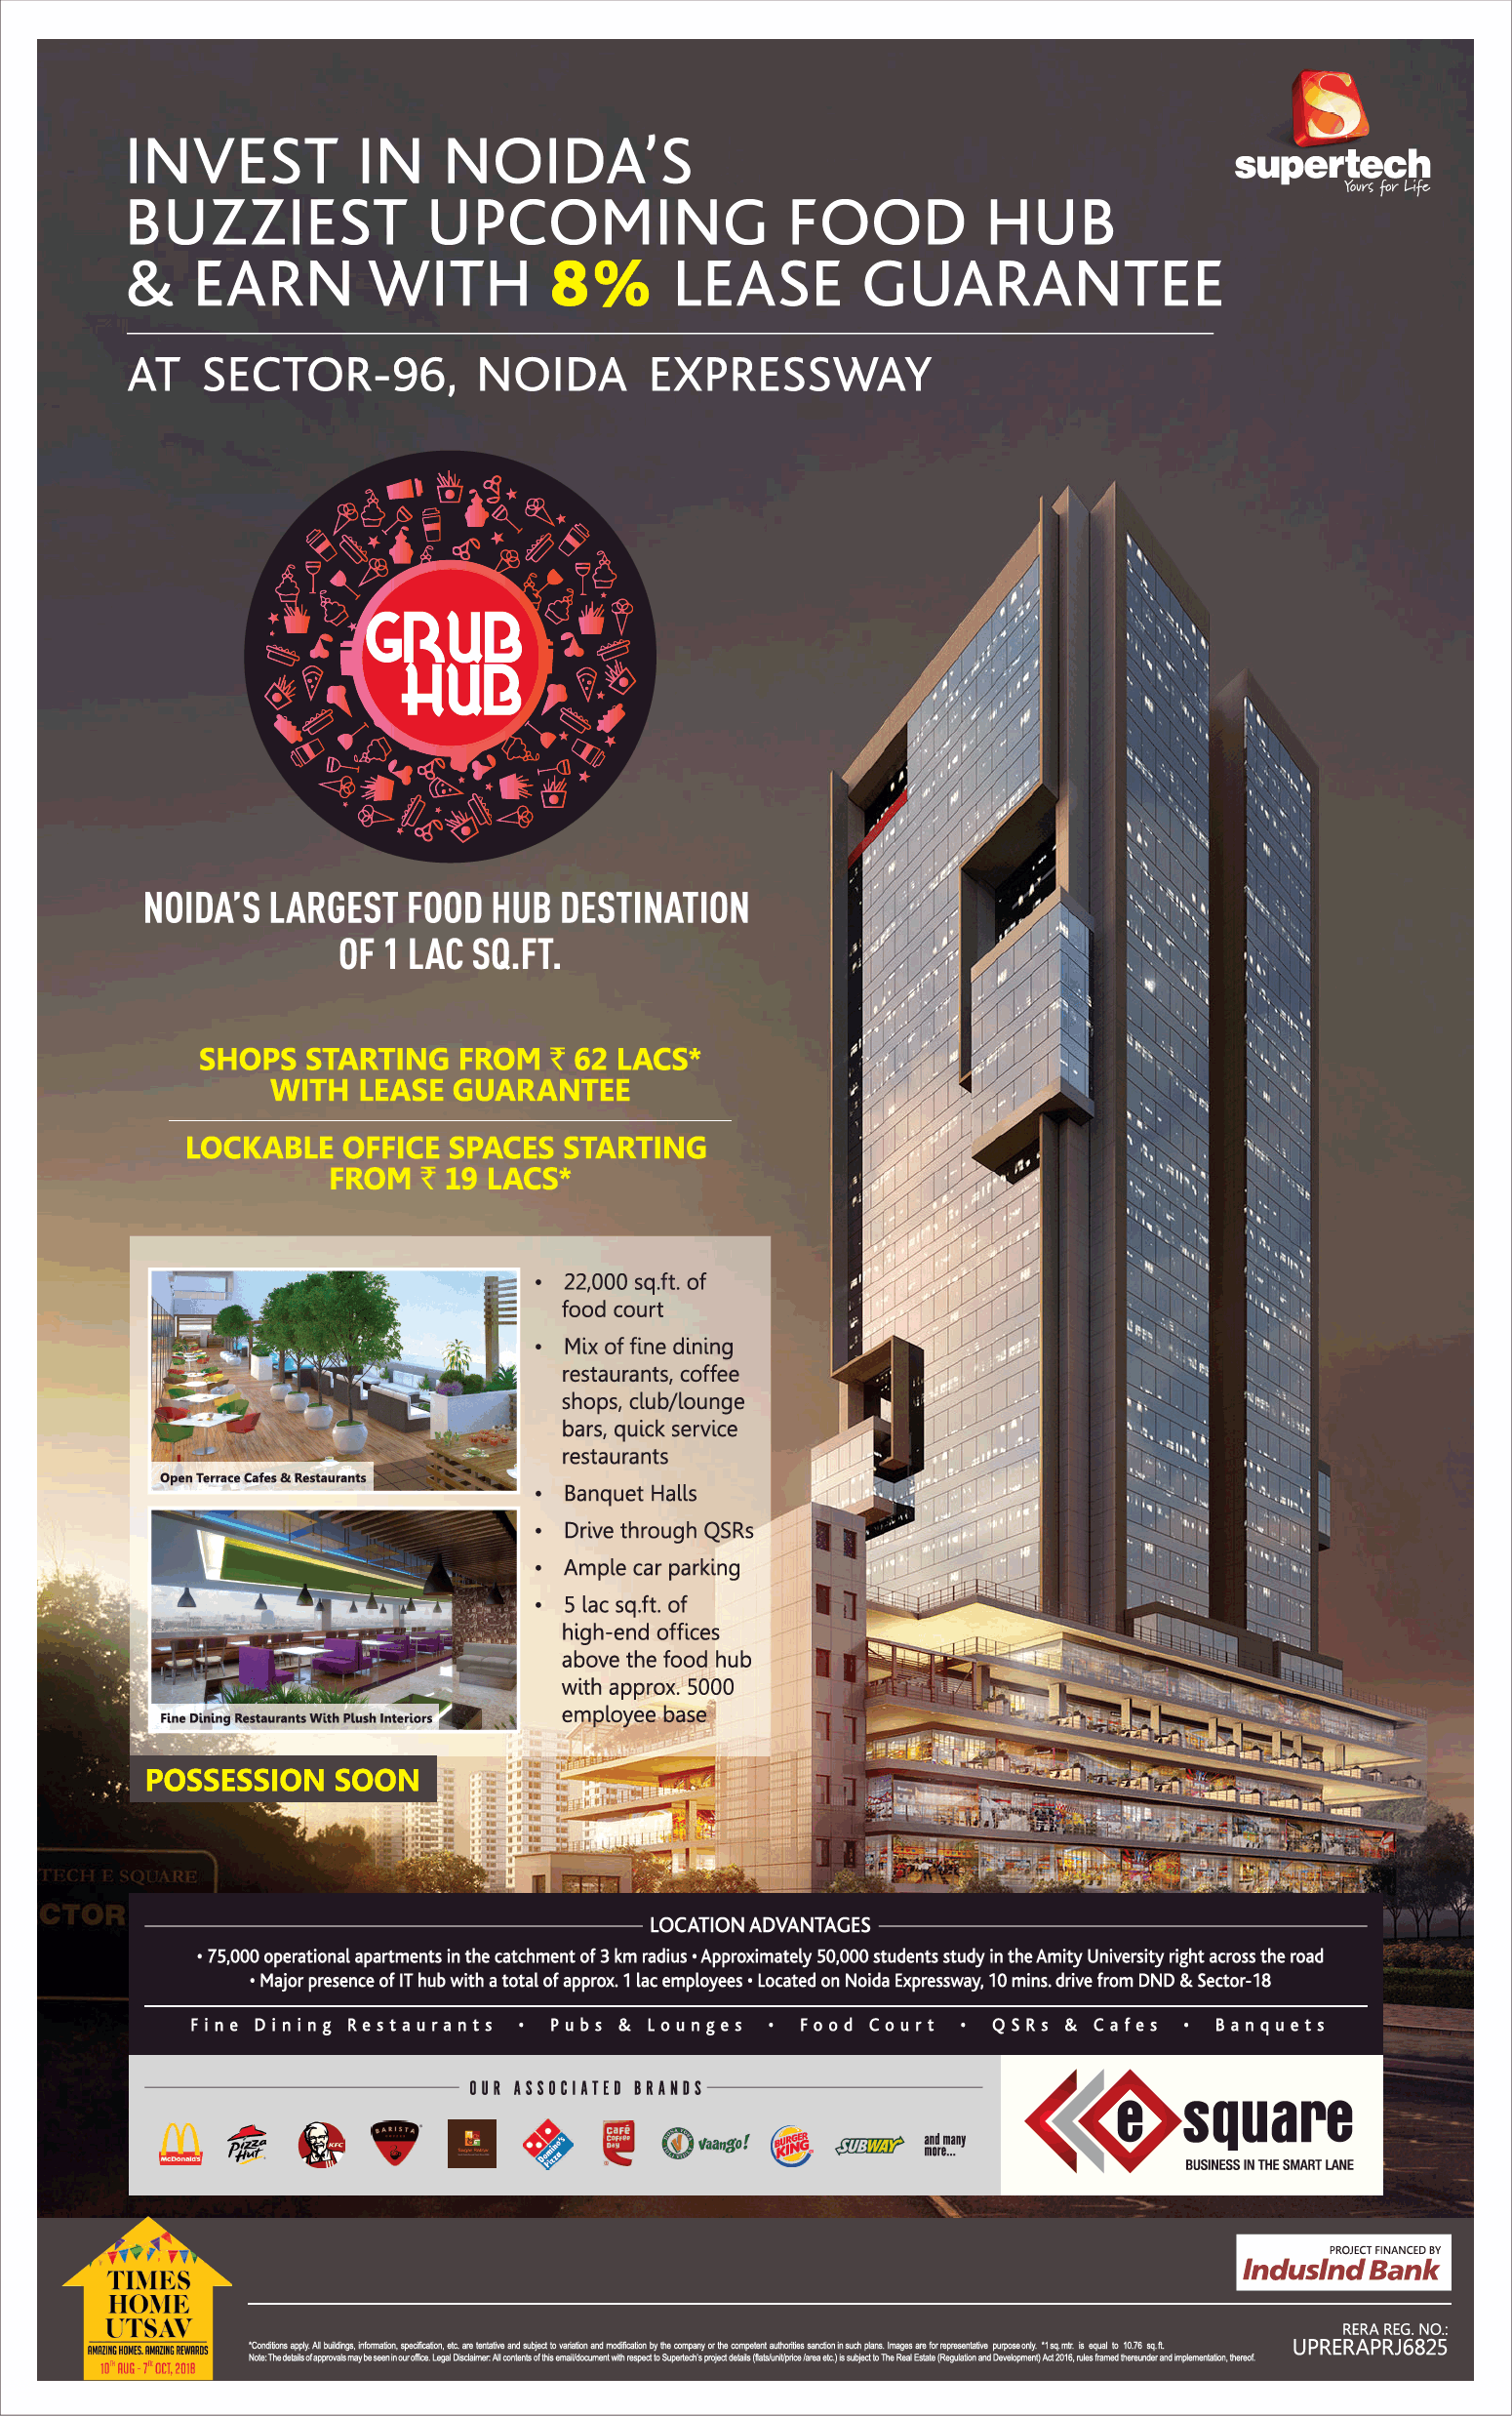 Invest in Noida's buzziest upcoming food hub & earn upto 8% lease guarantee at Supertech E Square Update